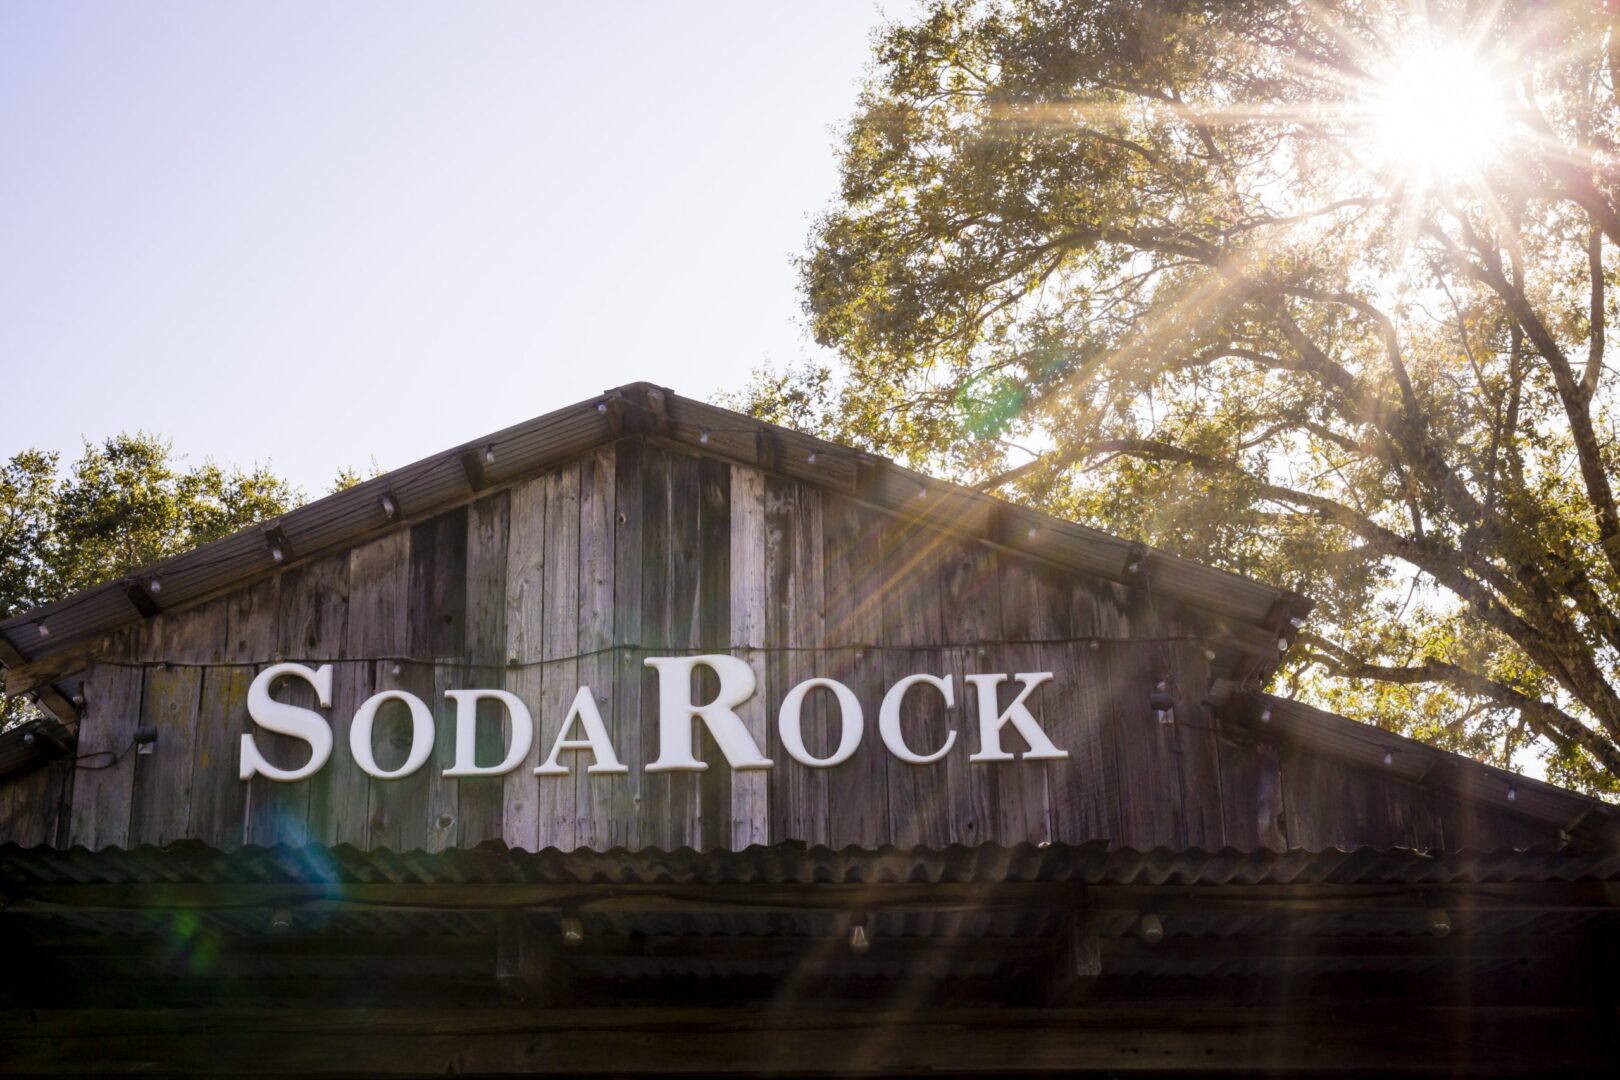 A sign that says soda rock on a wooden building.